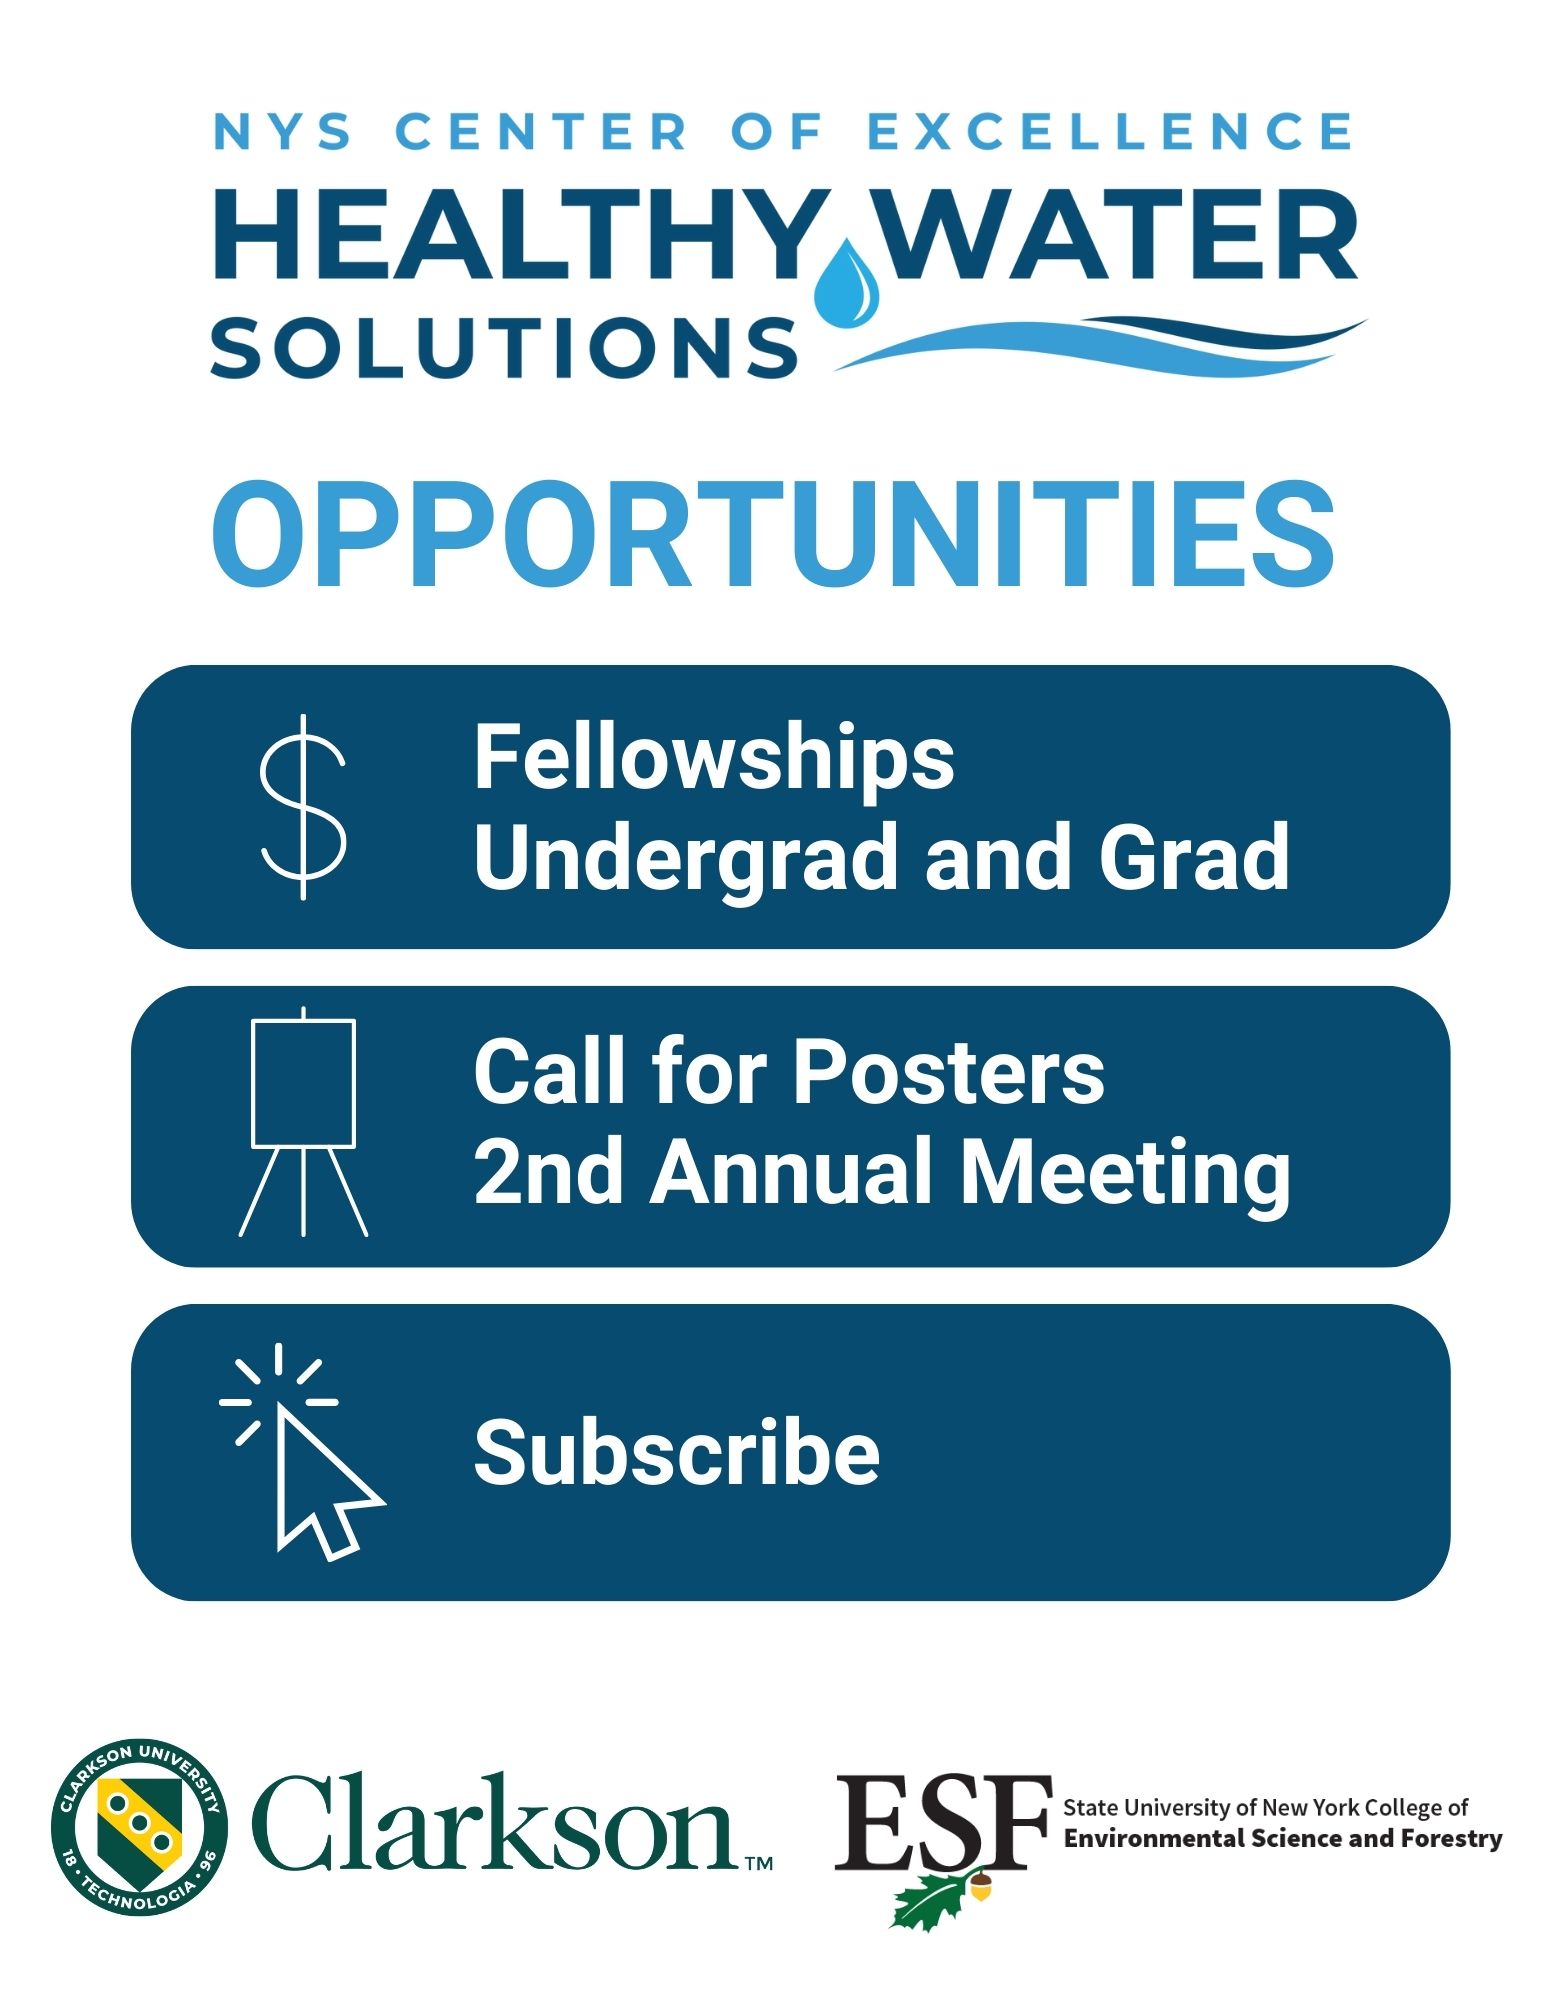 Opportunities with NYS CoE in Healthy Water Solutions